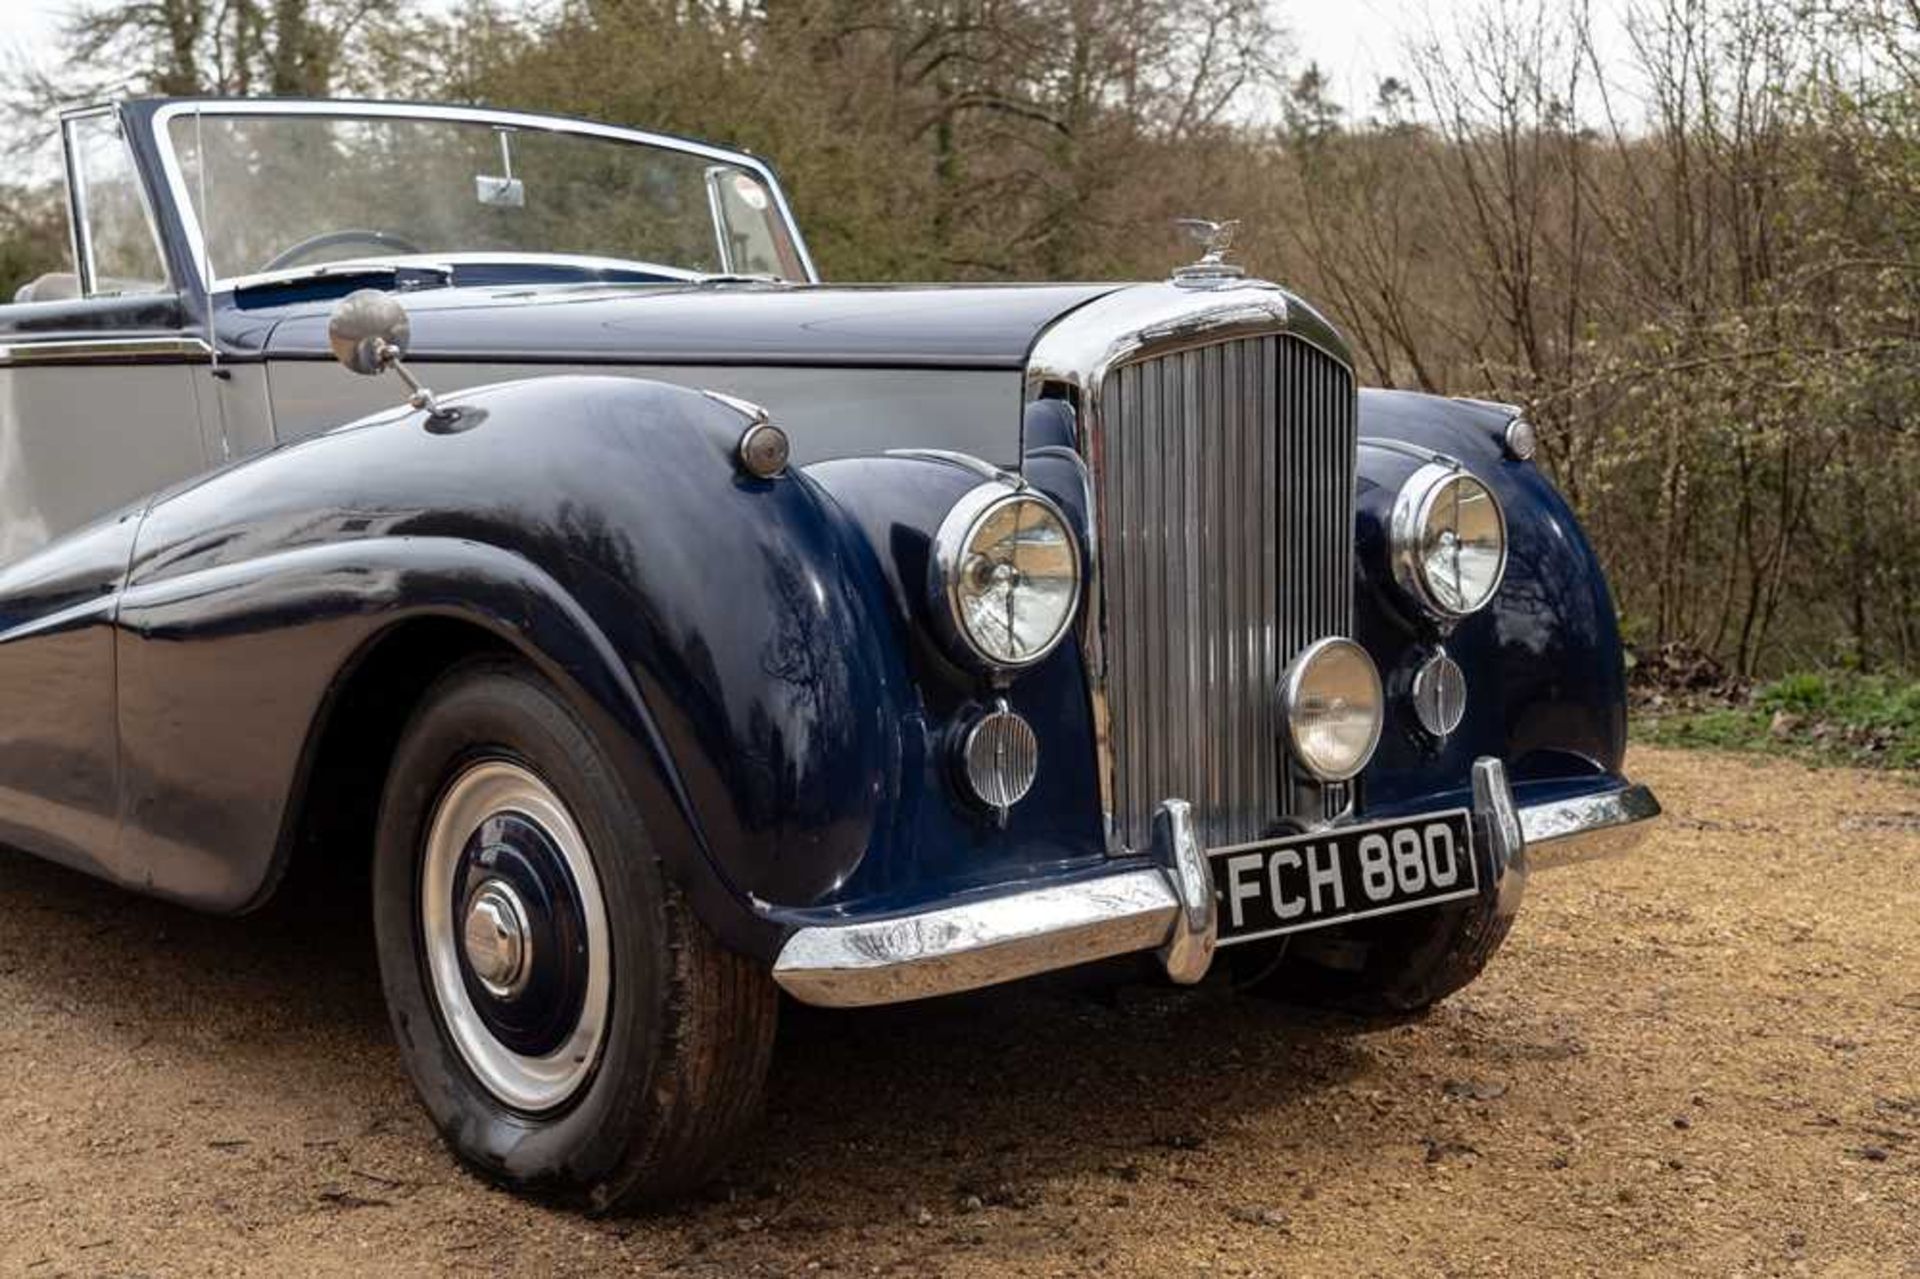 1954 Bentley R-Type Park Ward Drophead Coupe 1 of just 9 R-Type chassis clothed to Design 552 - Image 25 of 86